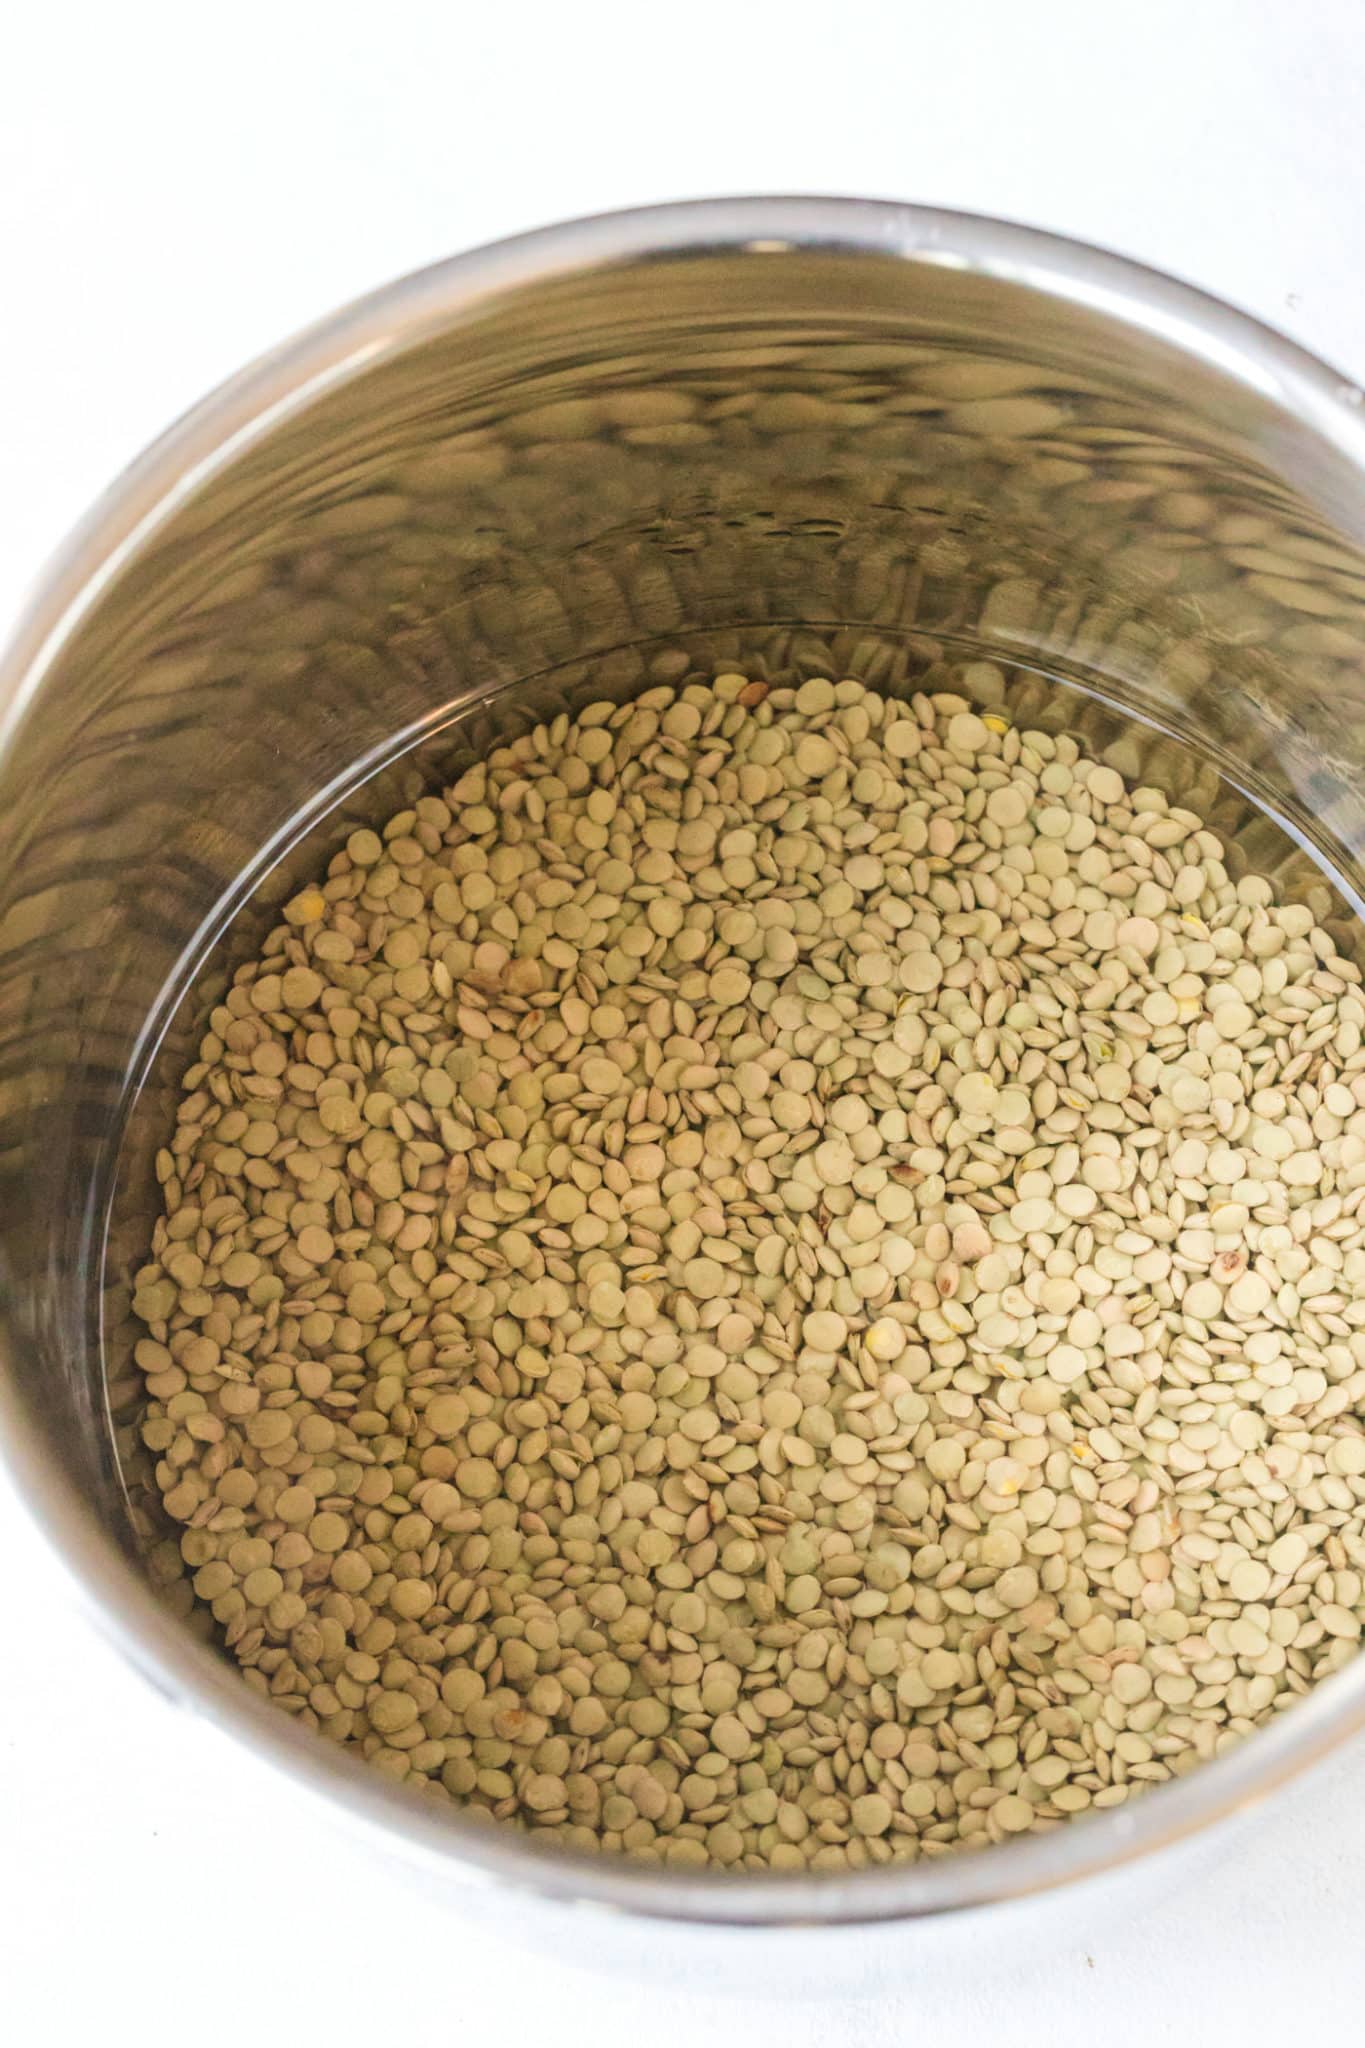 green lentils with water inside instant pot ready to cook.